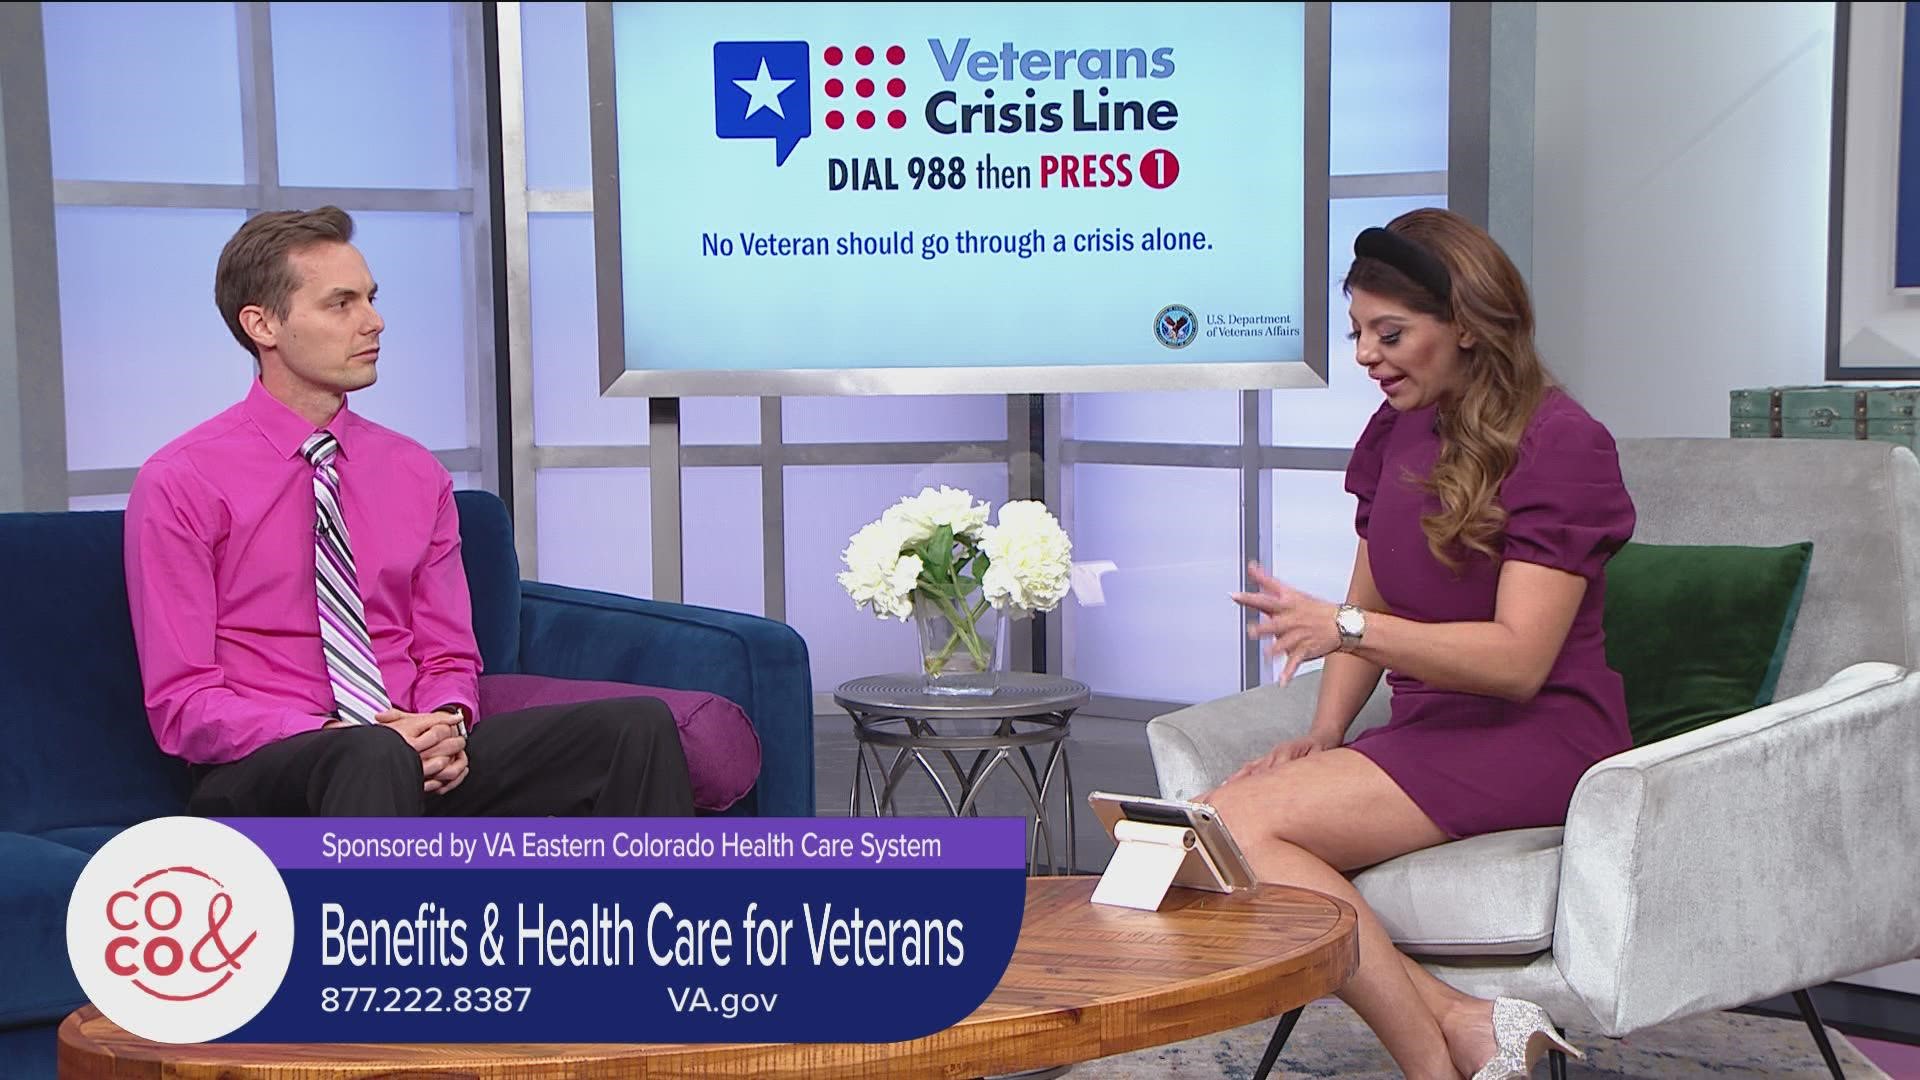 If you or a veteran in your life needs assistance, the Veteran's Crisis Line is available 24/7. Dial 988 and press 1 to be connected. Learn more at VA.gov.